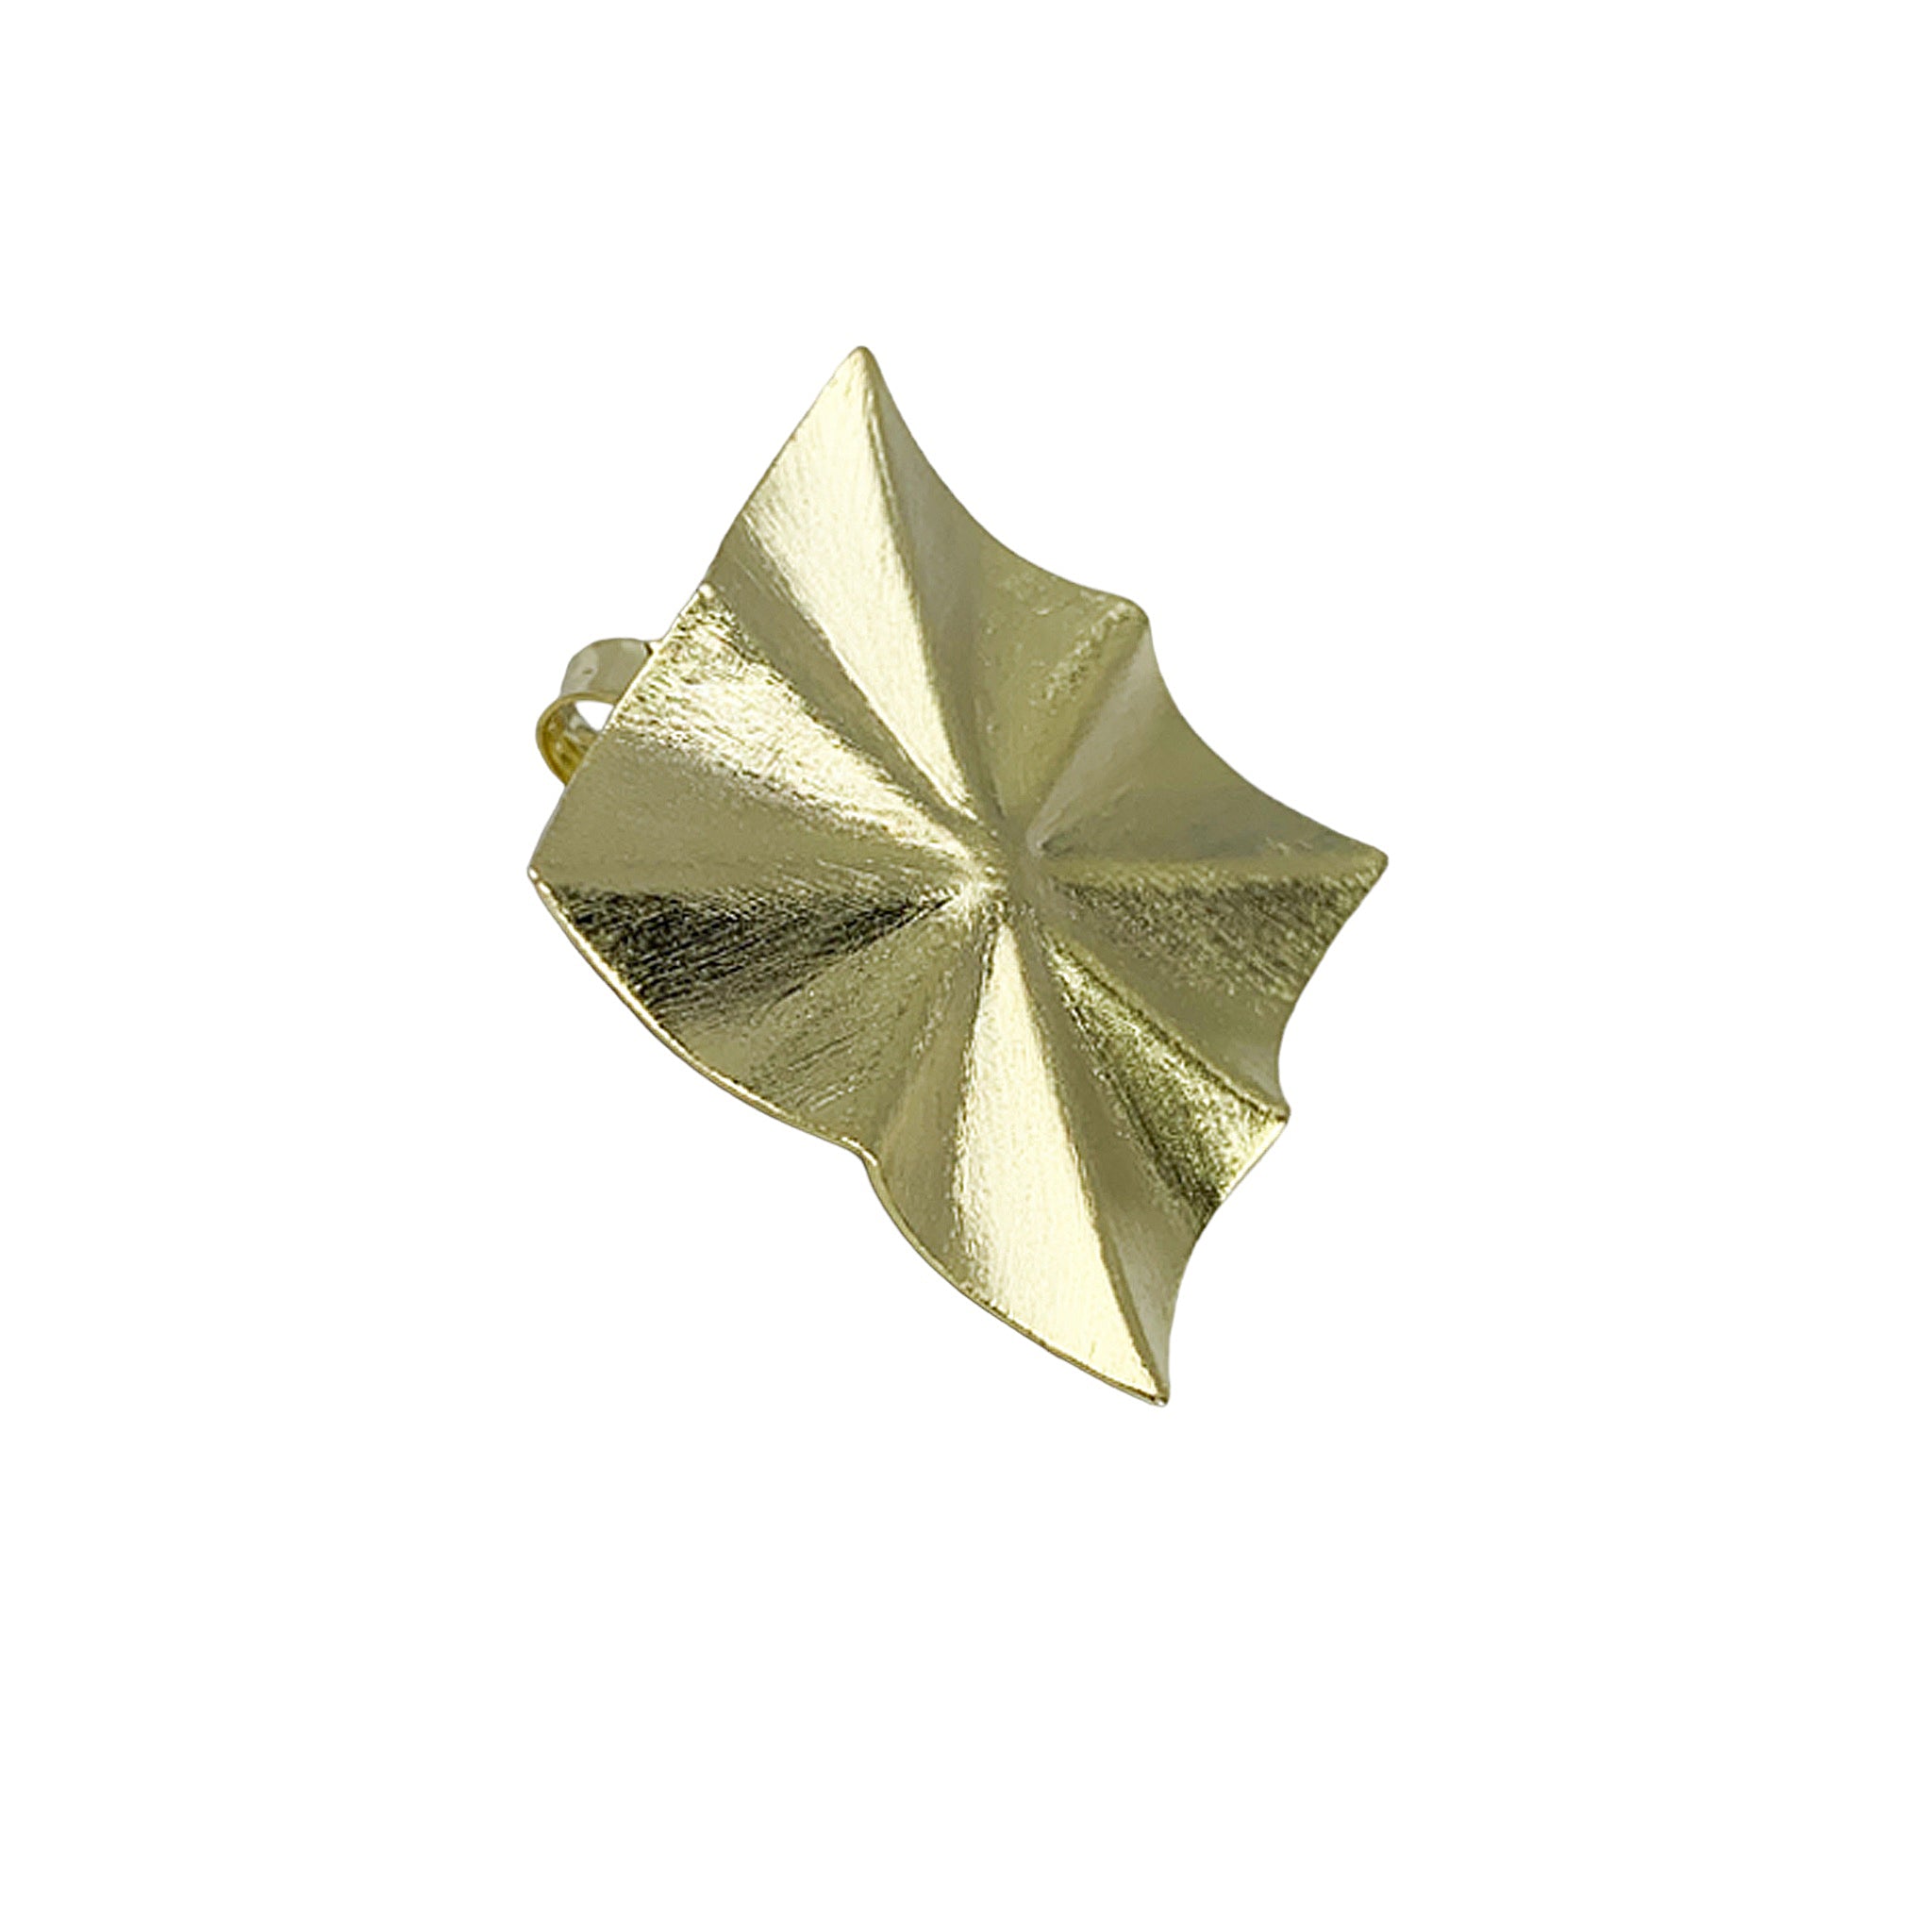 Sheila Fajl Radiance Square Stud Earrings in Brushed Gold Plated